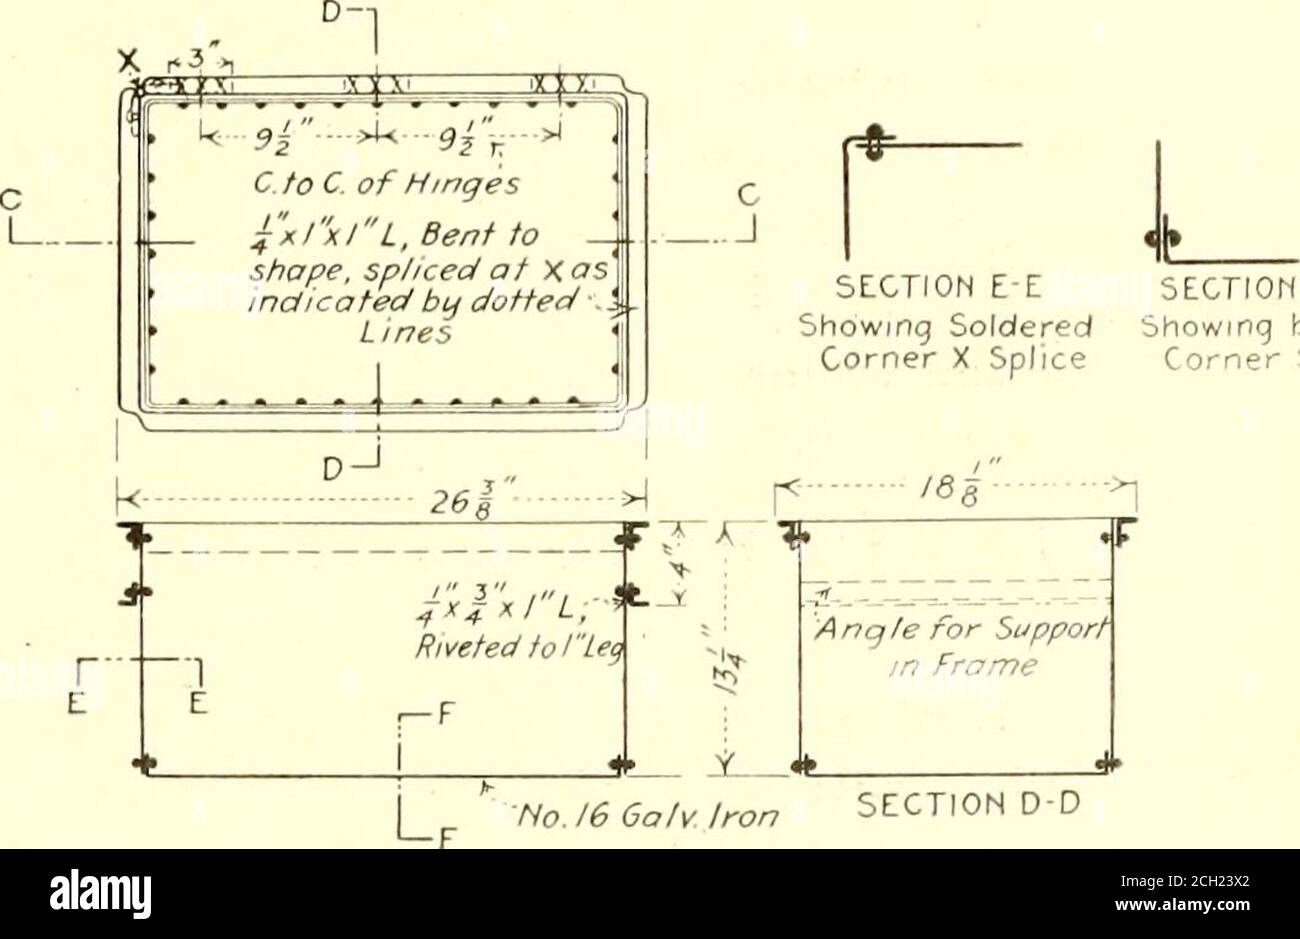 . Electric railway journal . * „ „ t ight Lines indicate 4xlxl Frame location of Tank in , Spliced and Riveted . Frameat Corner Posts p y I.Bar i-xli *  £ Jf Bar rivited. to Post. j PI. stops each end4 Coils Series Wound 4 O.C. 6alv. Iron ResistanceCoil on^ Porcelain InsulatSj£ Rod Support Coils 4 OX. jxll Bar-All Rivets i steelSECTION H-H tank proper is so made that it can readily be lifted fromthe frame, for the purpose of cleaning, etc. The four heater coils, made as part of the frame, areso placed that there is a clearance of about 2 in. betweenthem and the bottom of the tank. These coi Stock Photo